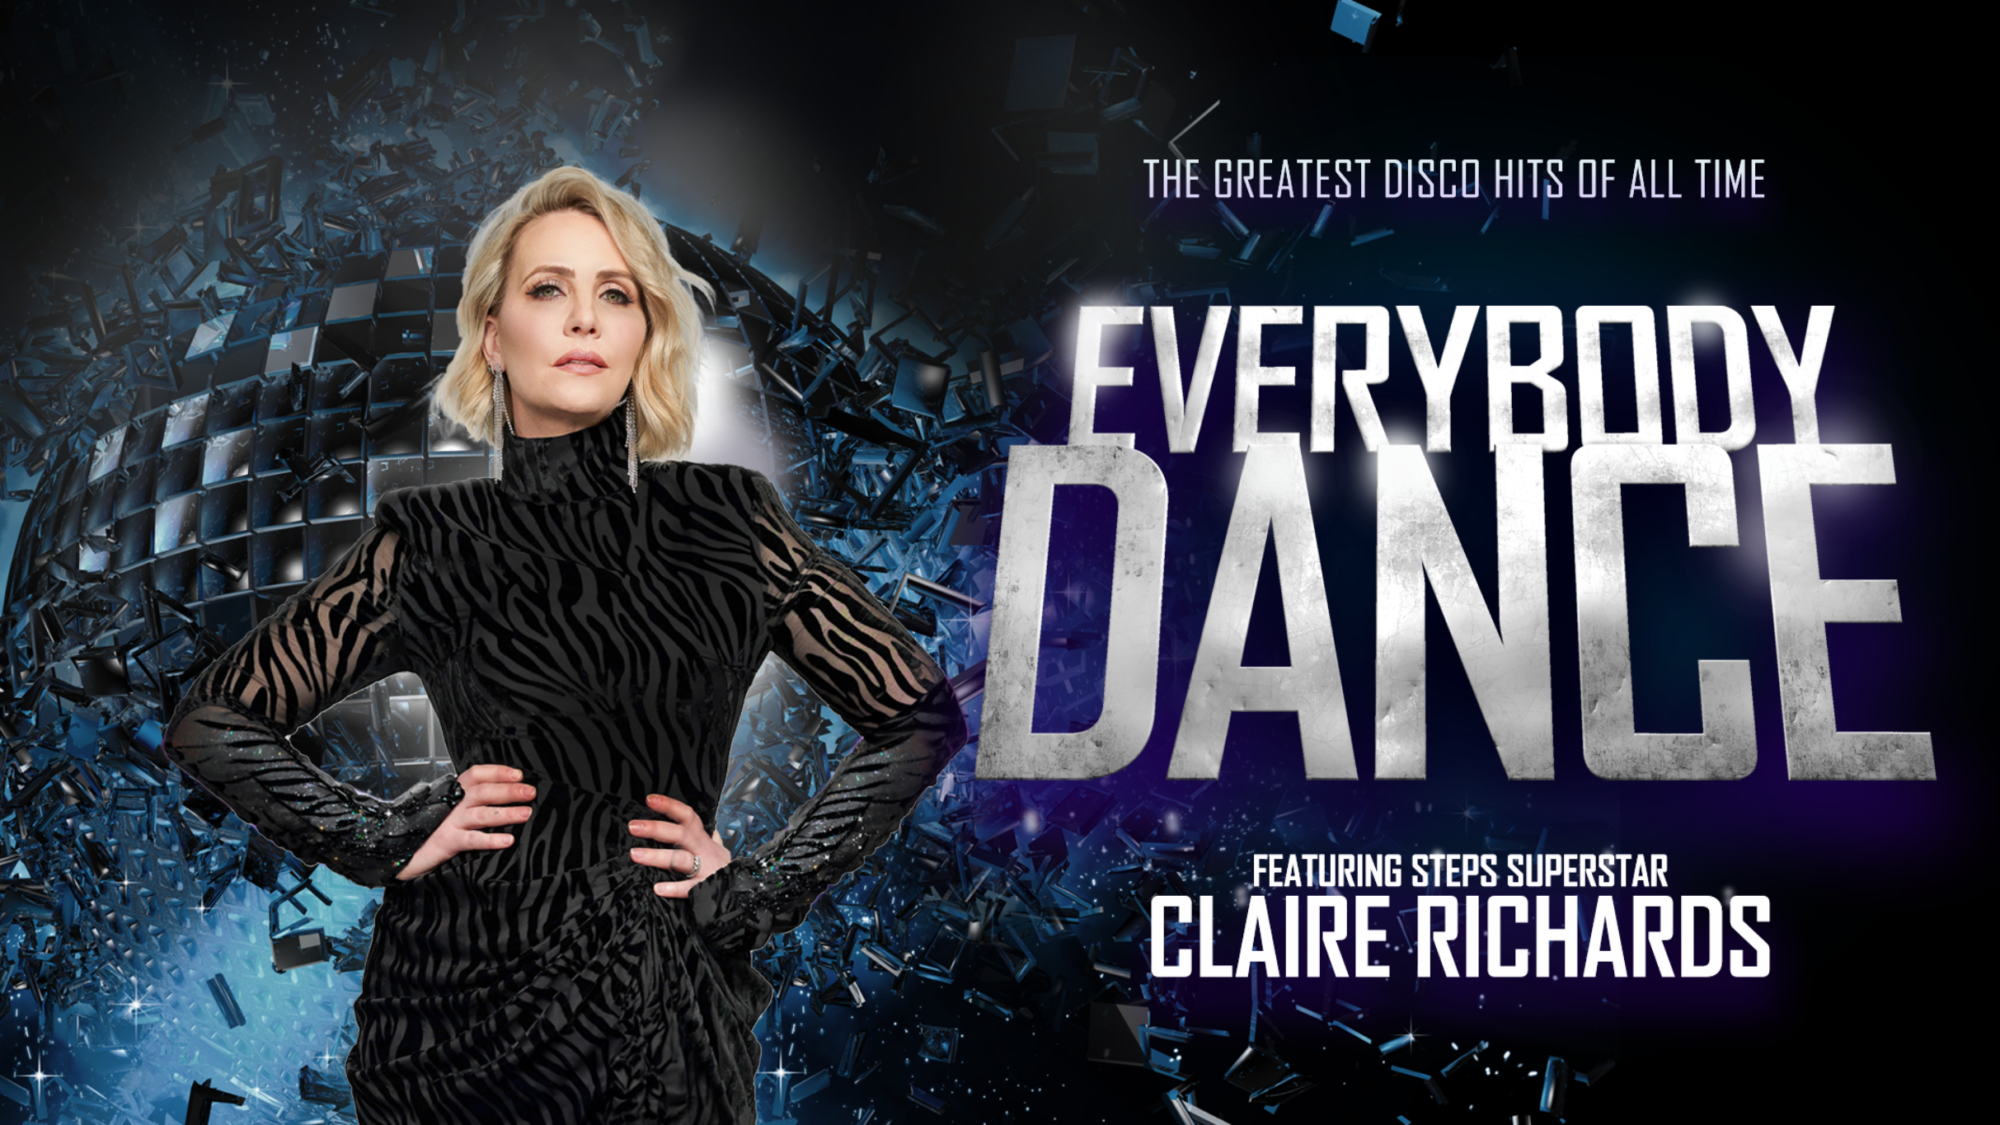 Image name Everybody Dance with Claire Richards at Hull City Hall Hull the 1 image from the post Everybody Dance with Claire Richards at Leeds Grand Theatre, Leeds in Yorkshire.com.